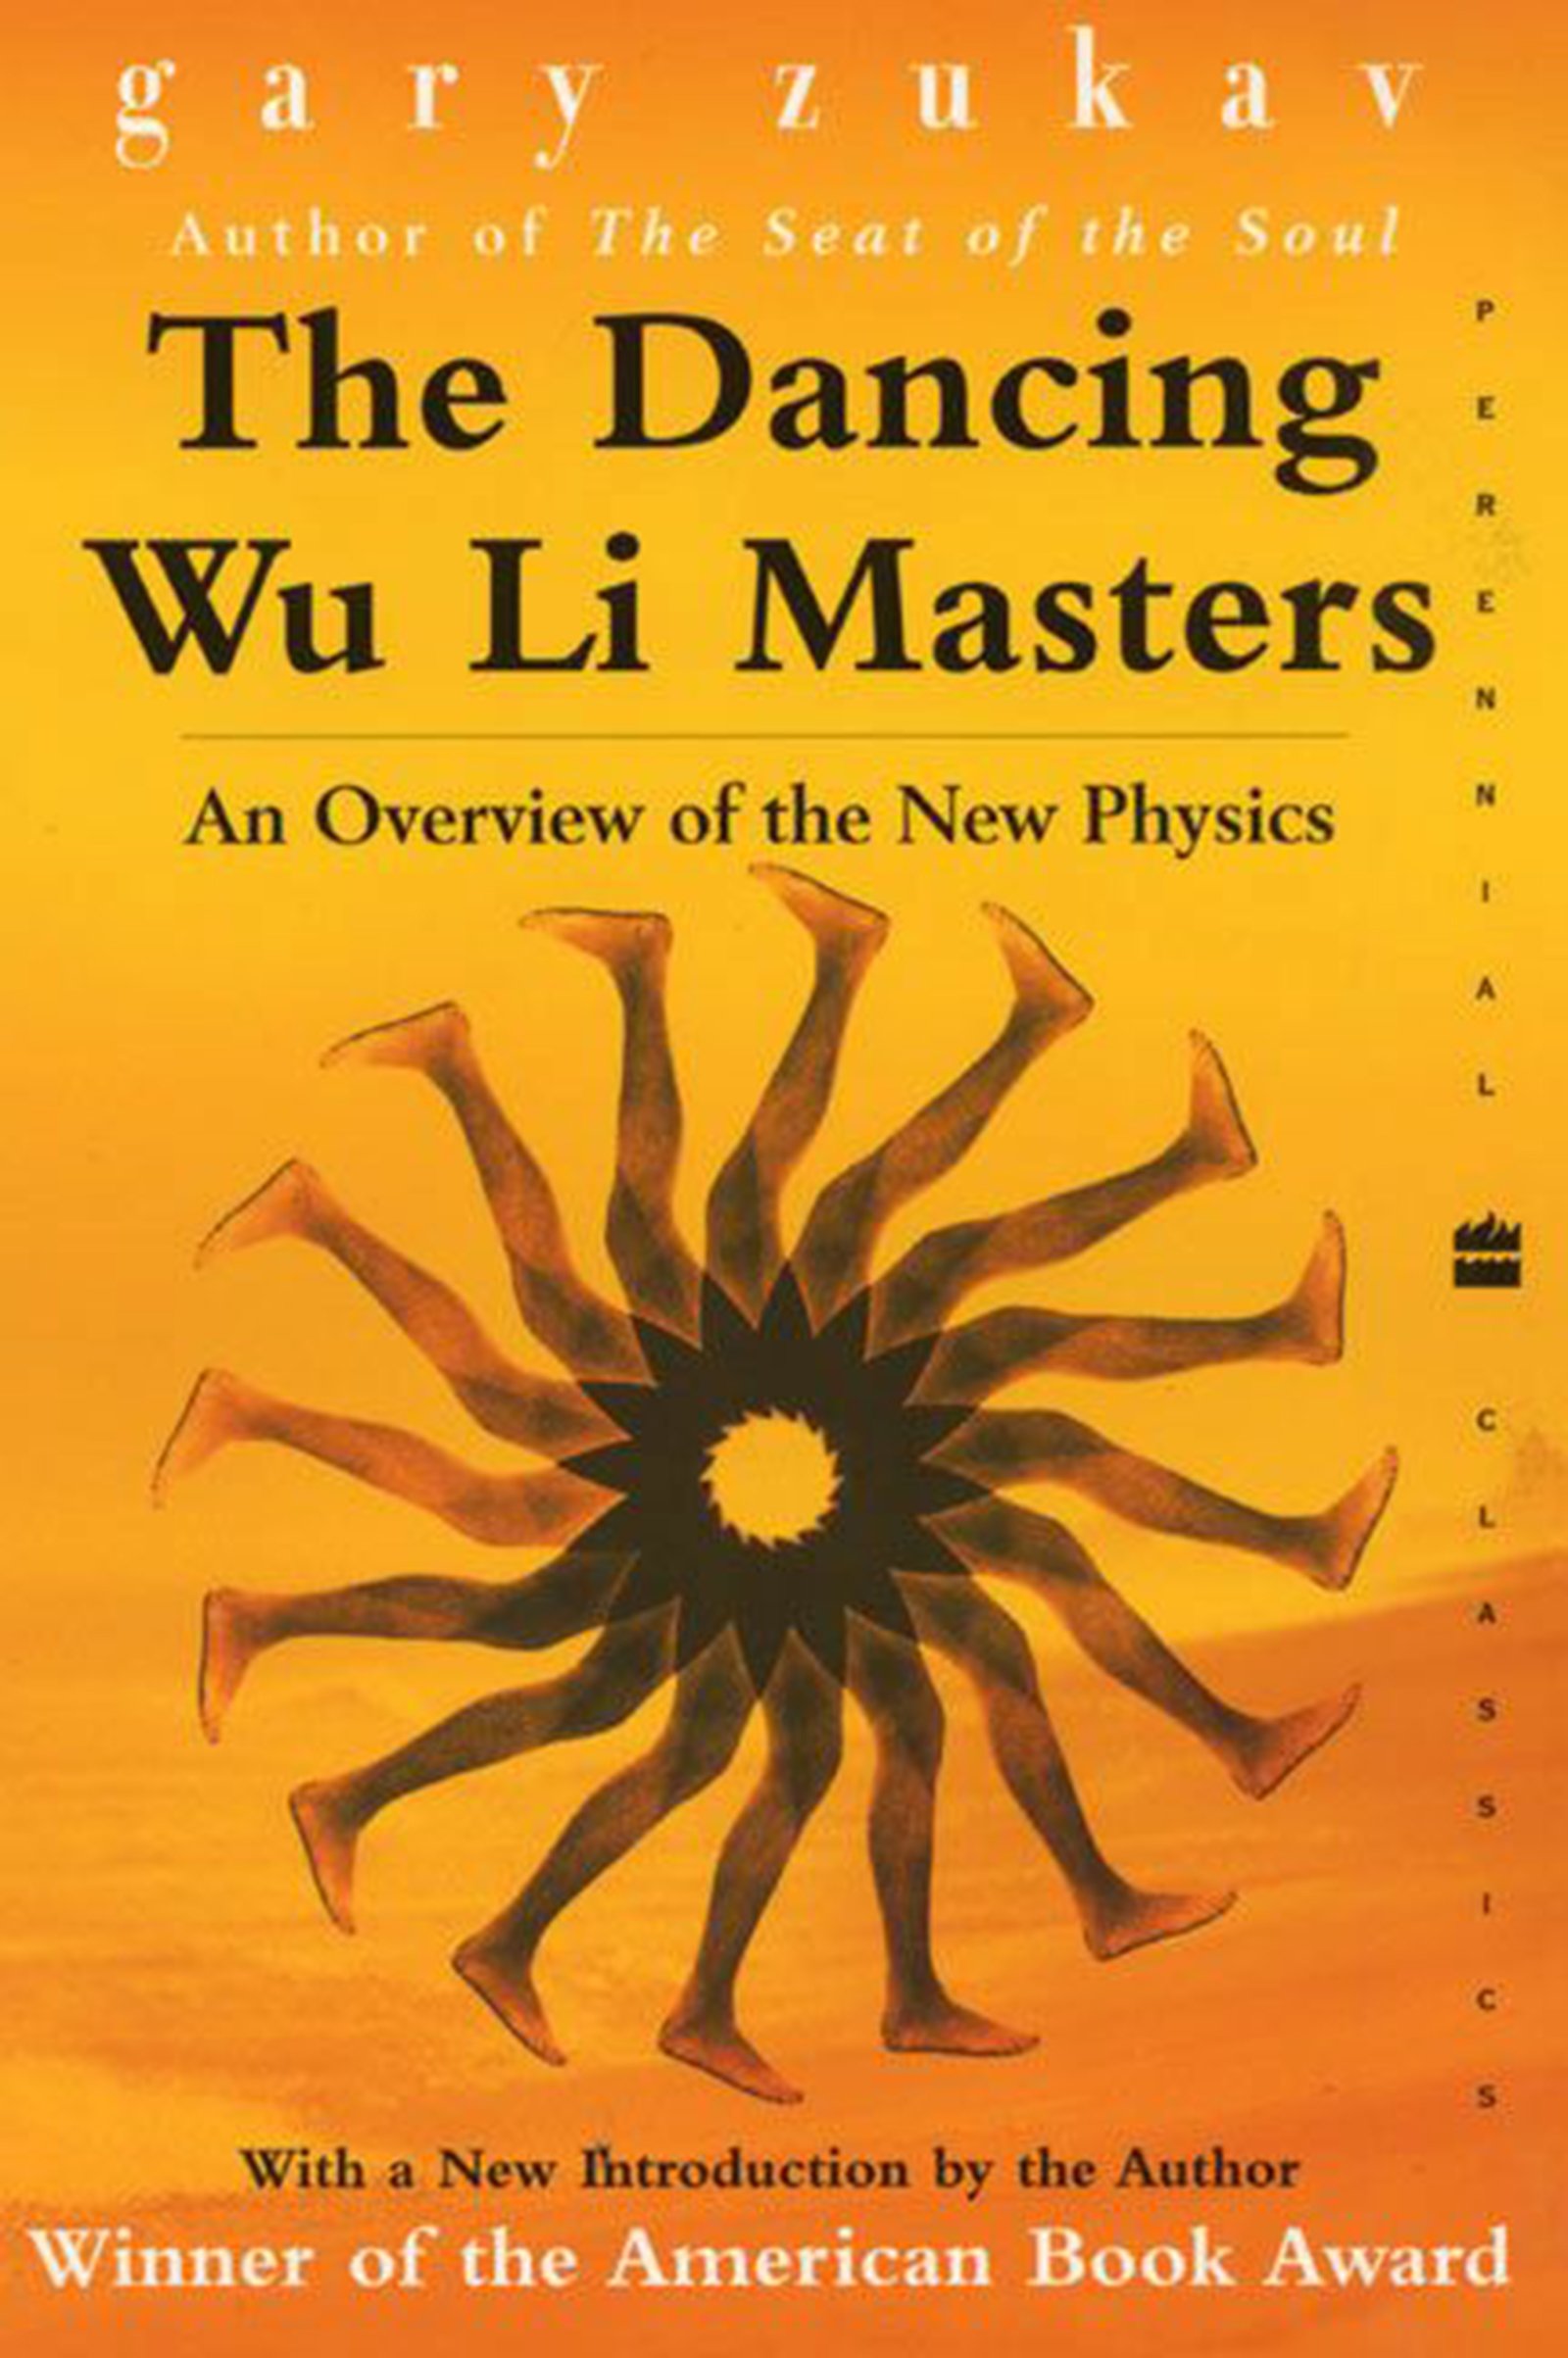 The book cover for The Dancing Wu Li Masters.